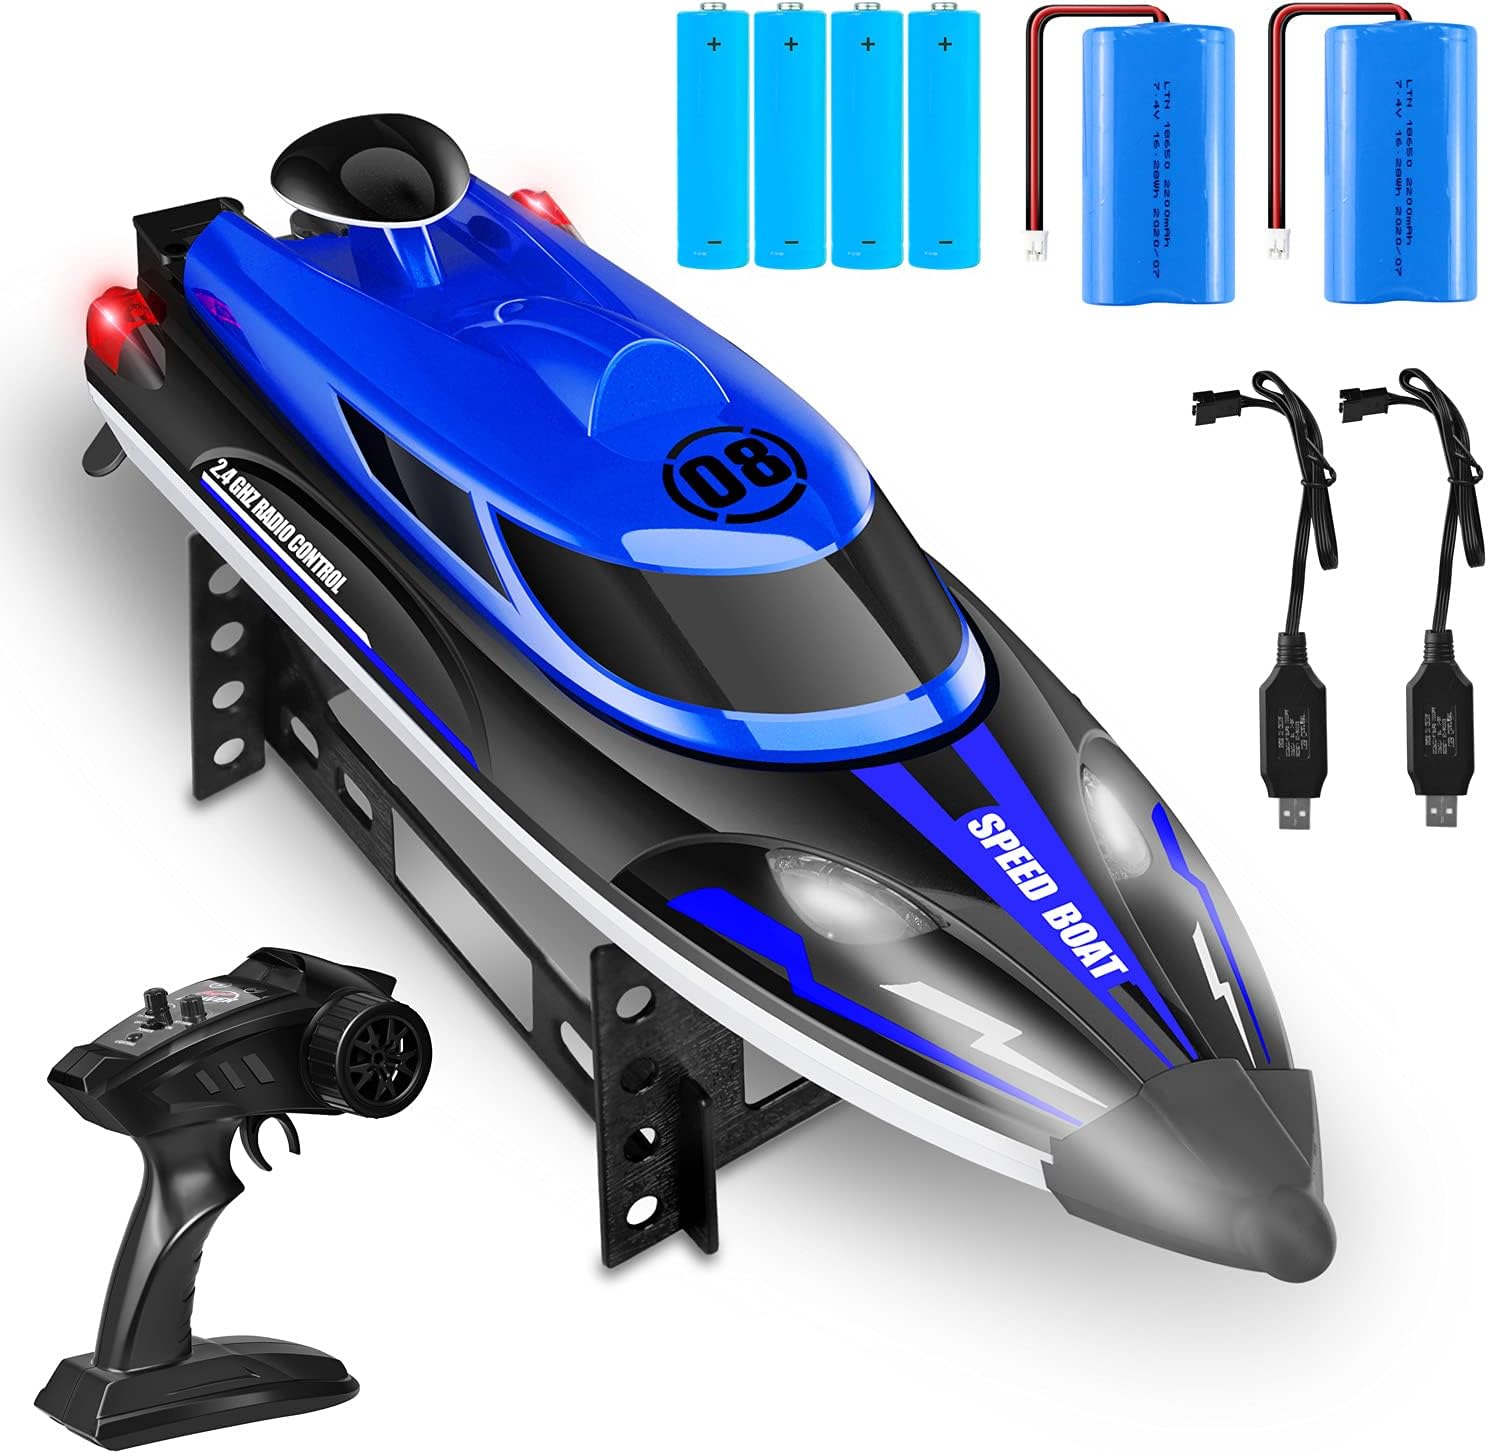 Red Capsize Recovery Remote Control Boat for Pools Lakes with 2 Rechargeable Battery 2.4 G RC Boat 20+ MPH Speed Radio Controlled Boats with LED Light for Adults Kids Low Battery Alarm